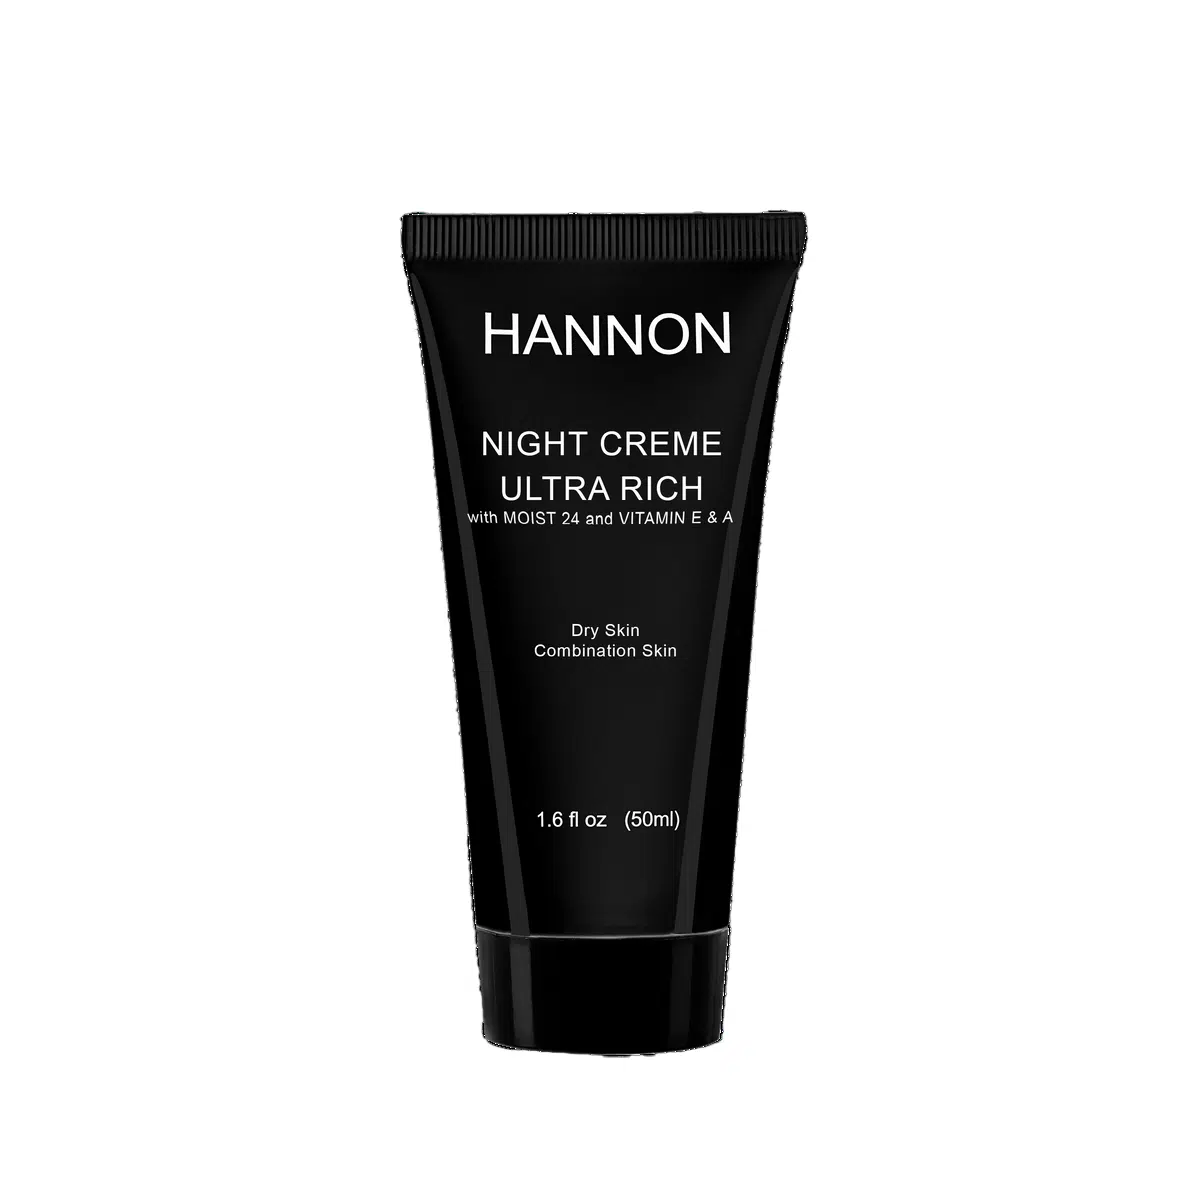 Experience the luxurious Hannon Night Crème, formulated to be ultra rich and deeply nourishing. This Hannon - Night Crème Ultra Rich 50ml is perfect for reviving your skin while you sleep.